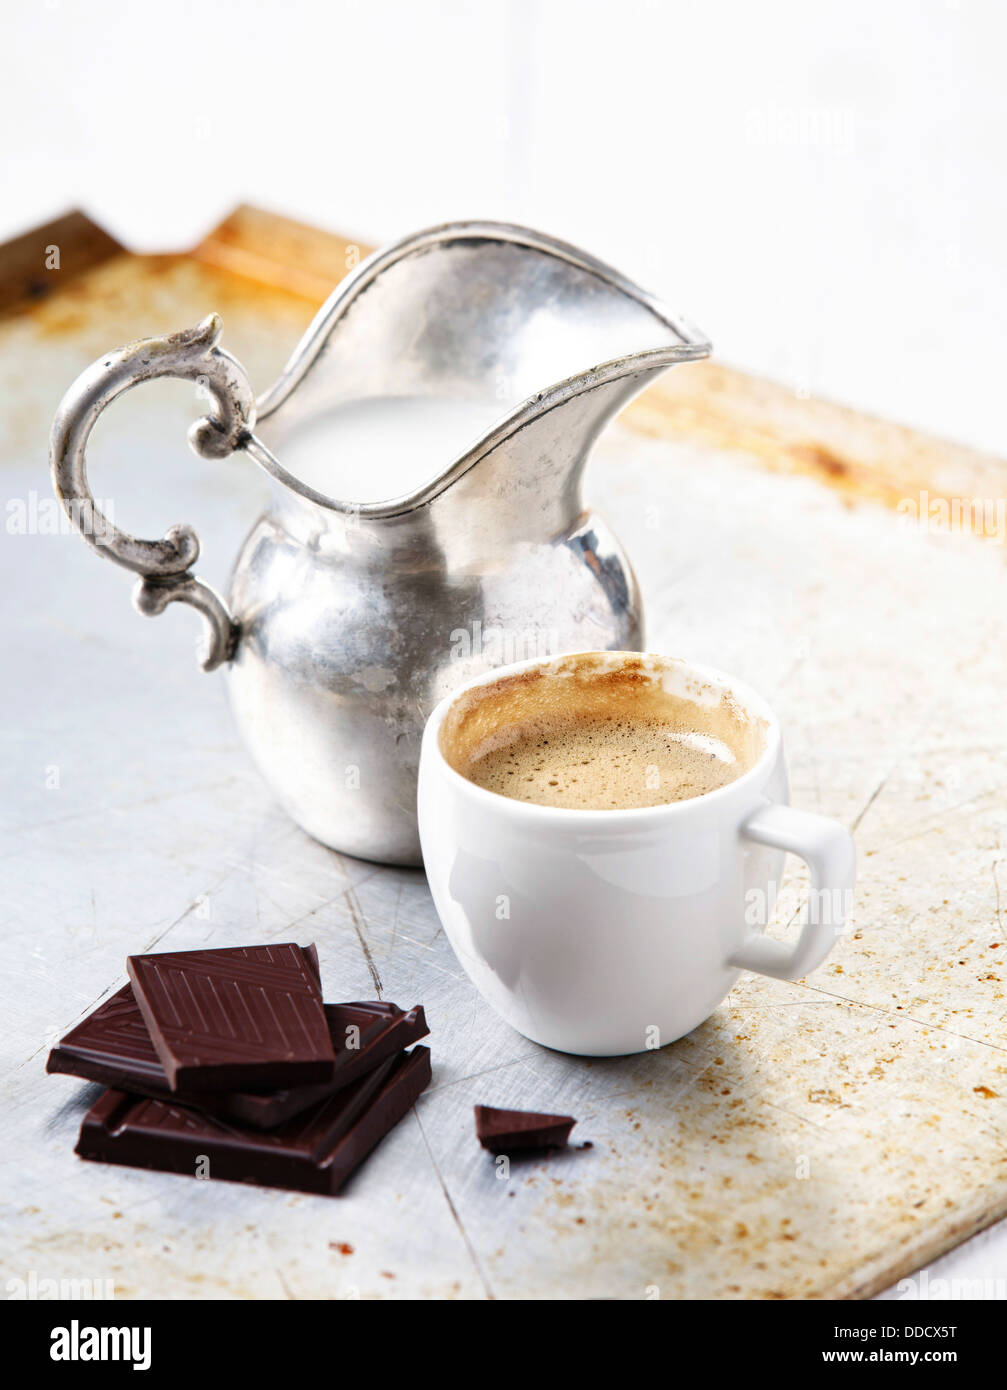 Espresso cup with chocolate and milk Stock Photo